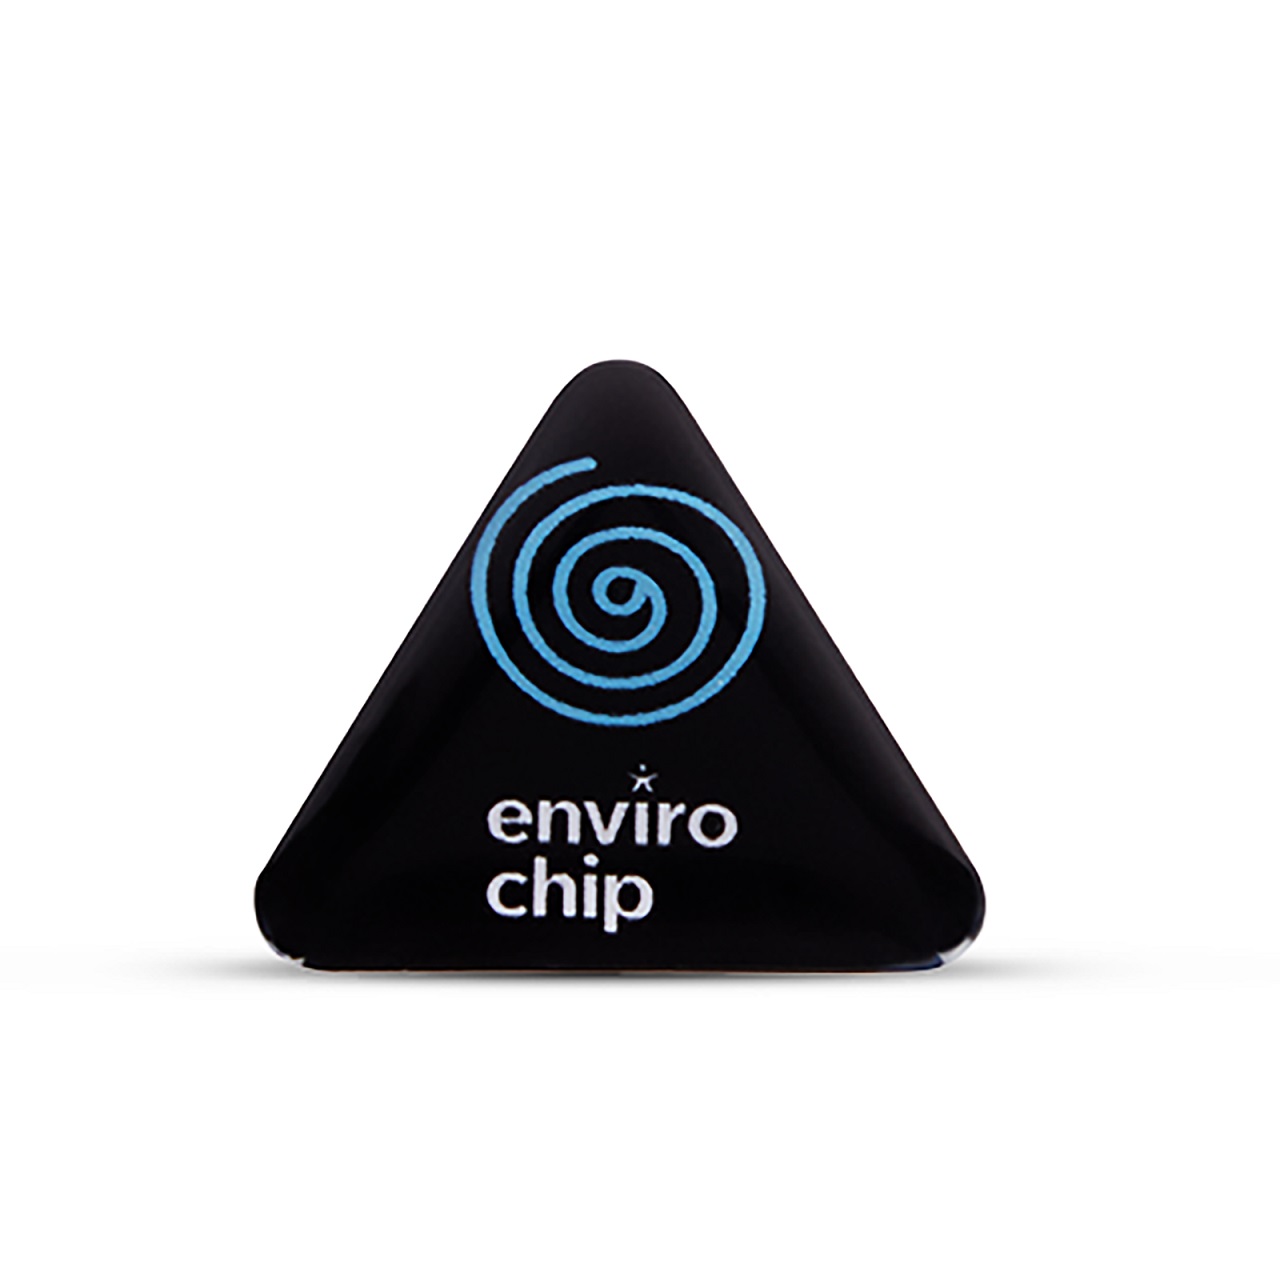 envirochip-clinically-tested-patented-anti-radiation-chip-for-mobile-phone-elements-design-air-black